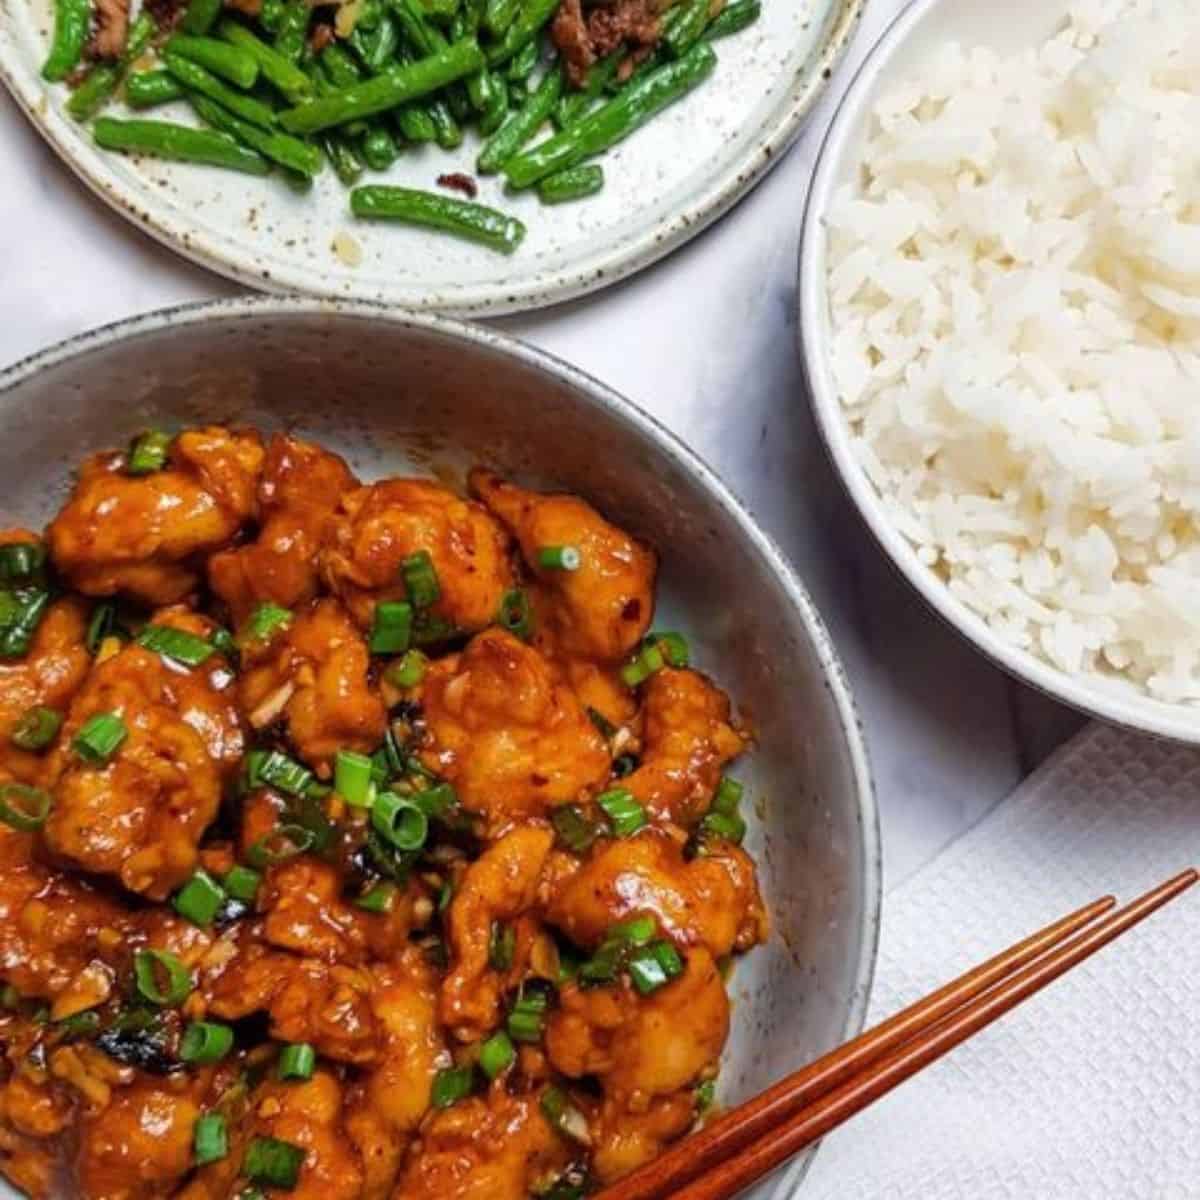 Szechuan chicken, with a side of white rice